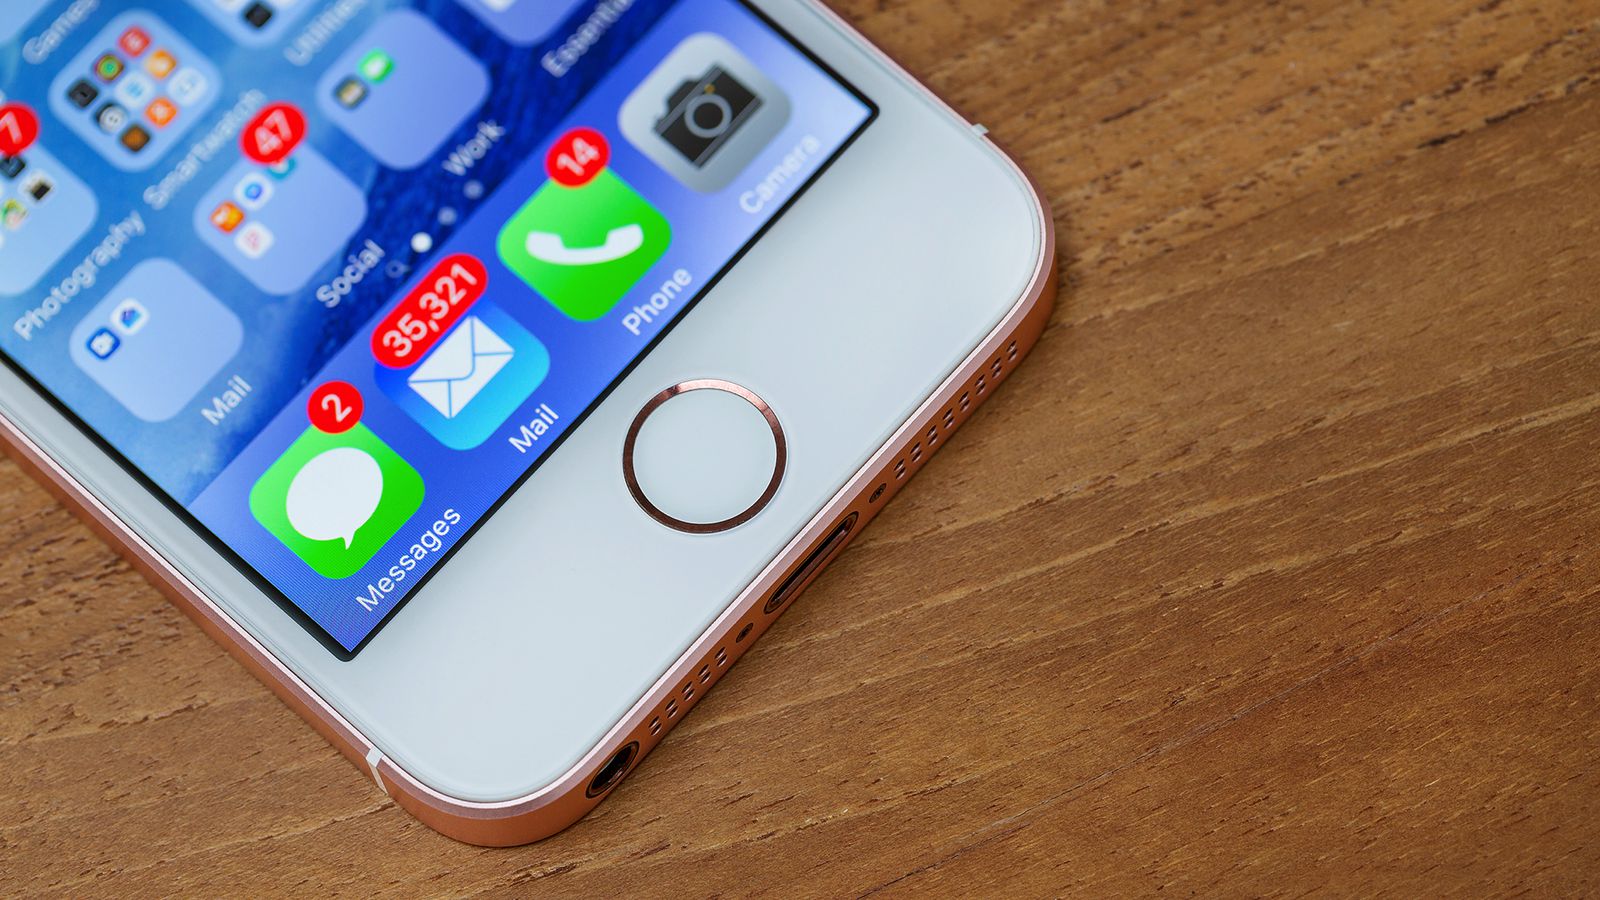 Apple says the average iPhone is unlocked 80 times a day.